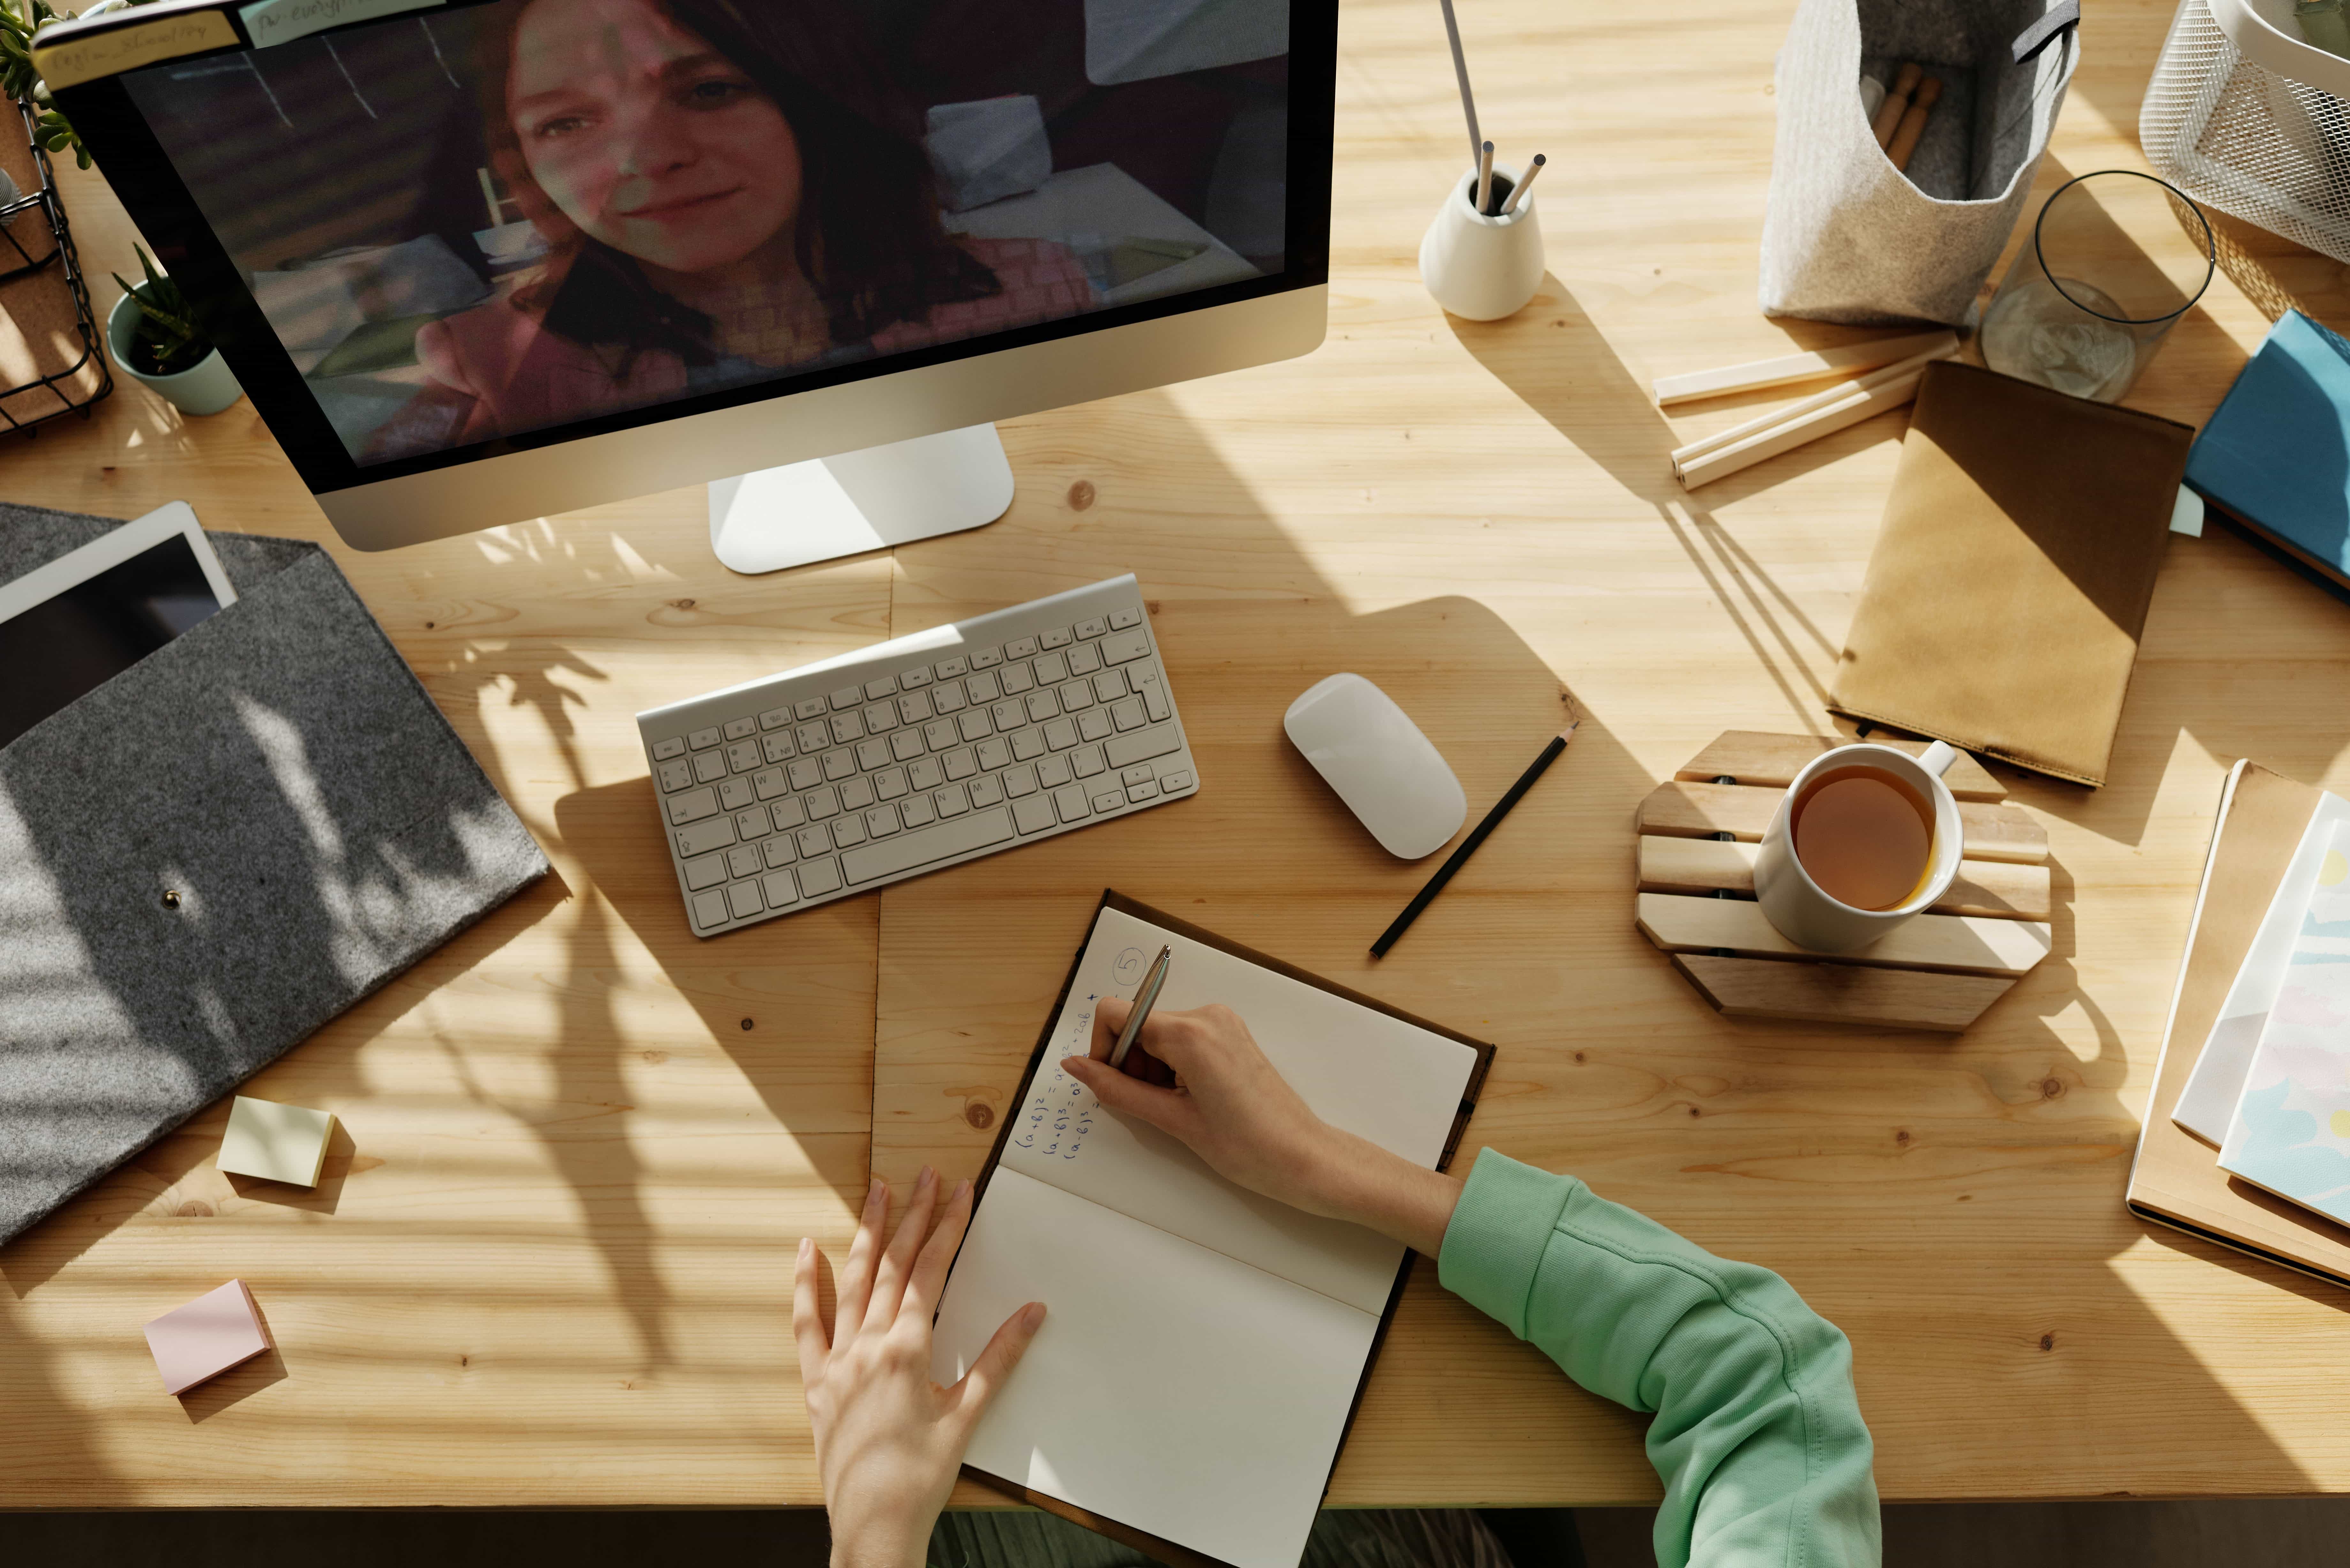 Remote worker engaged in video communication